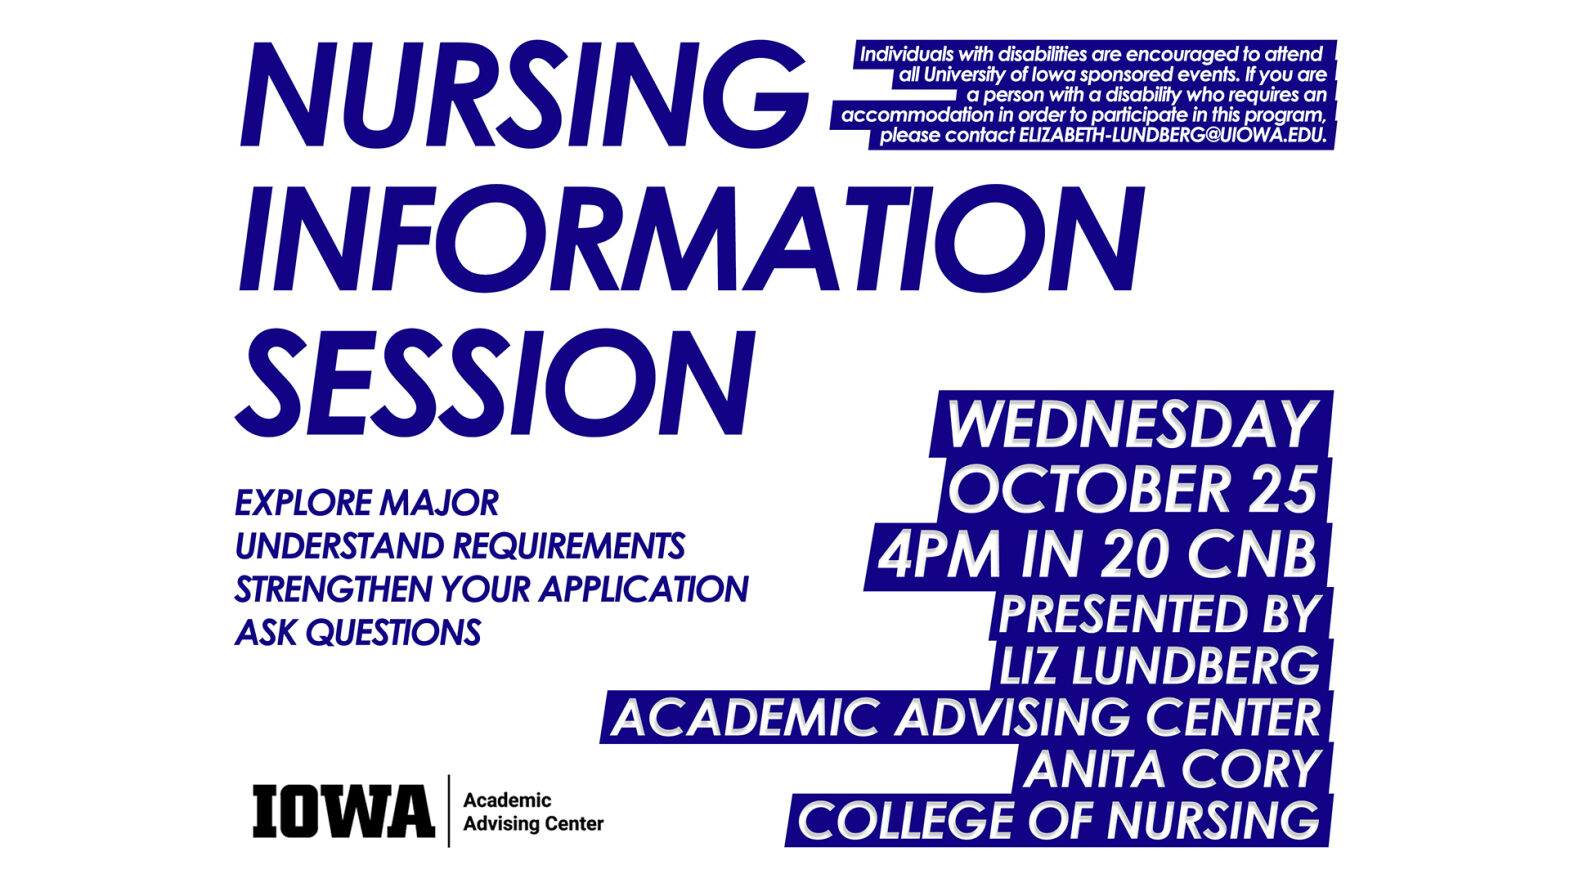 Nursing info session Oct 25th 4pm in CNB 20